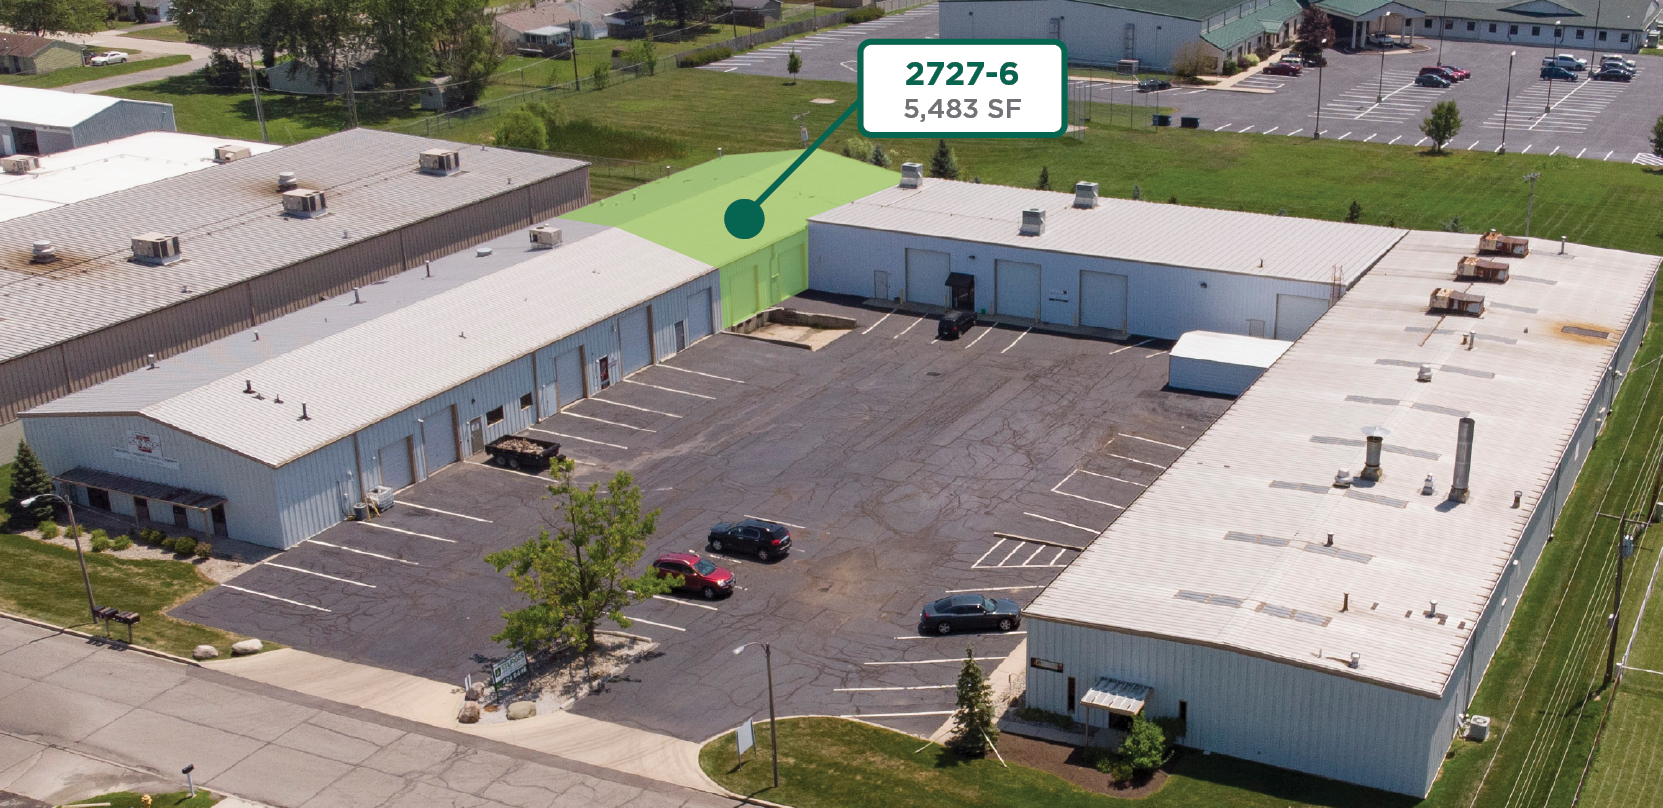 Sturges Property Group - Lofty Drive Industrial Space For Lease in Fort Wayne, IN 46808